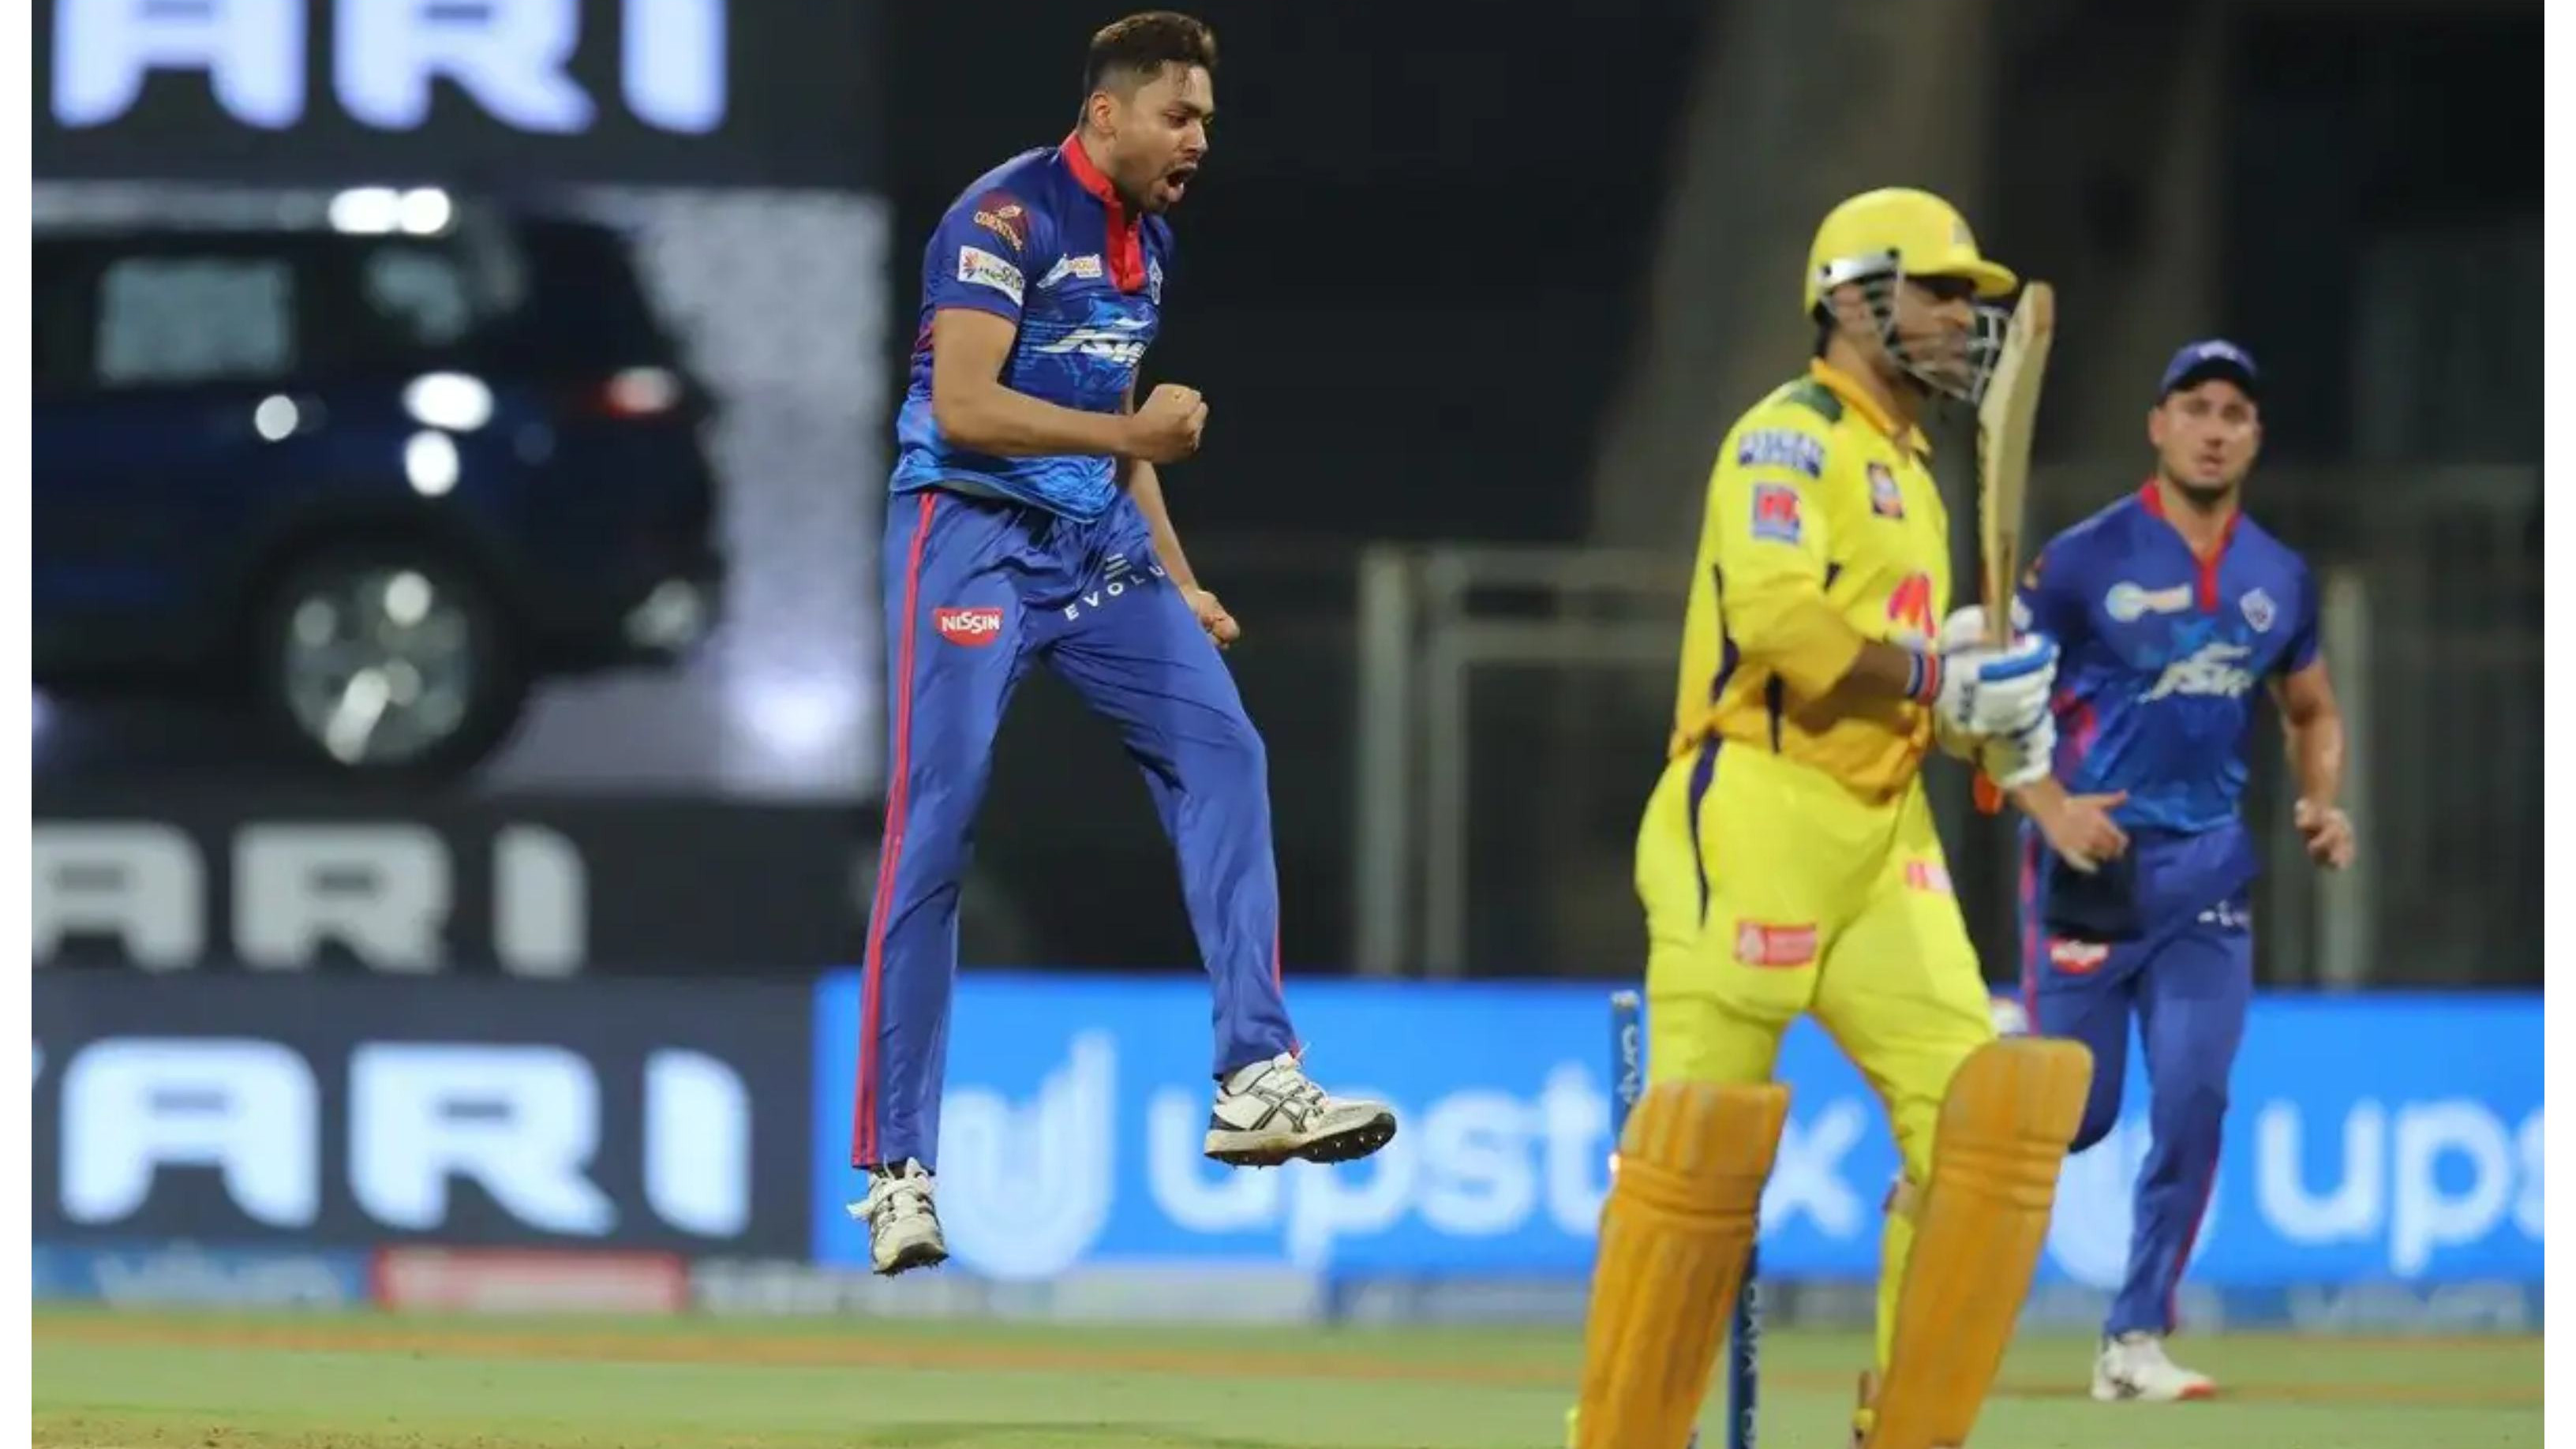 IPL 2021: WATCH - Avesh Khan on cloud nine after fulfilling the dream of taking MS Dhoni’s wicket